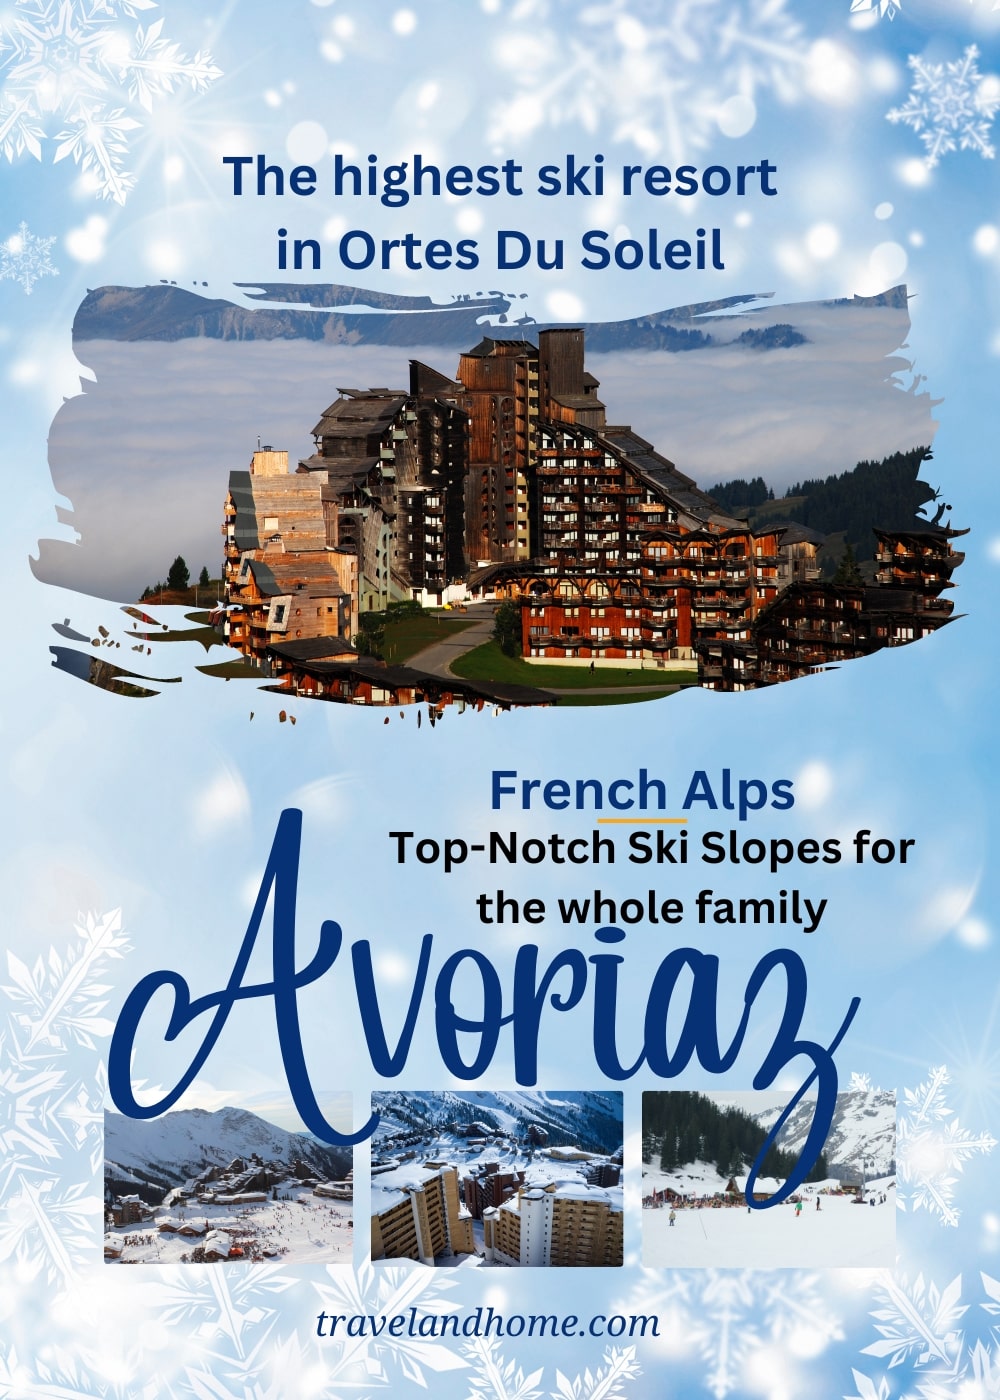 Highest ski resort in ortes du soleil is Avoriaz in the French Alps, travel and home min